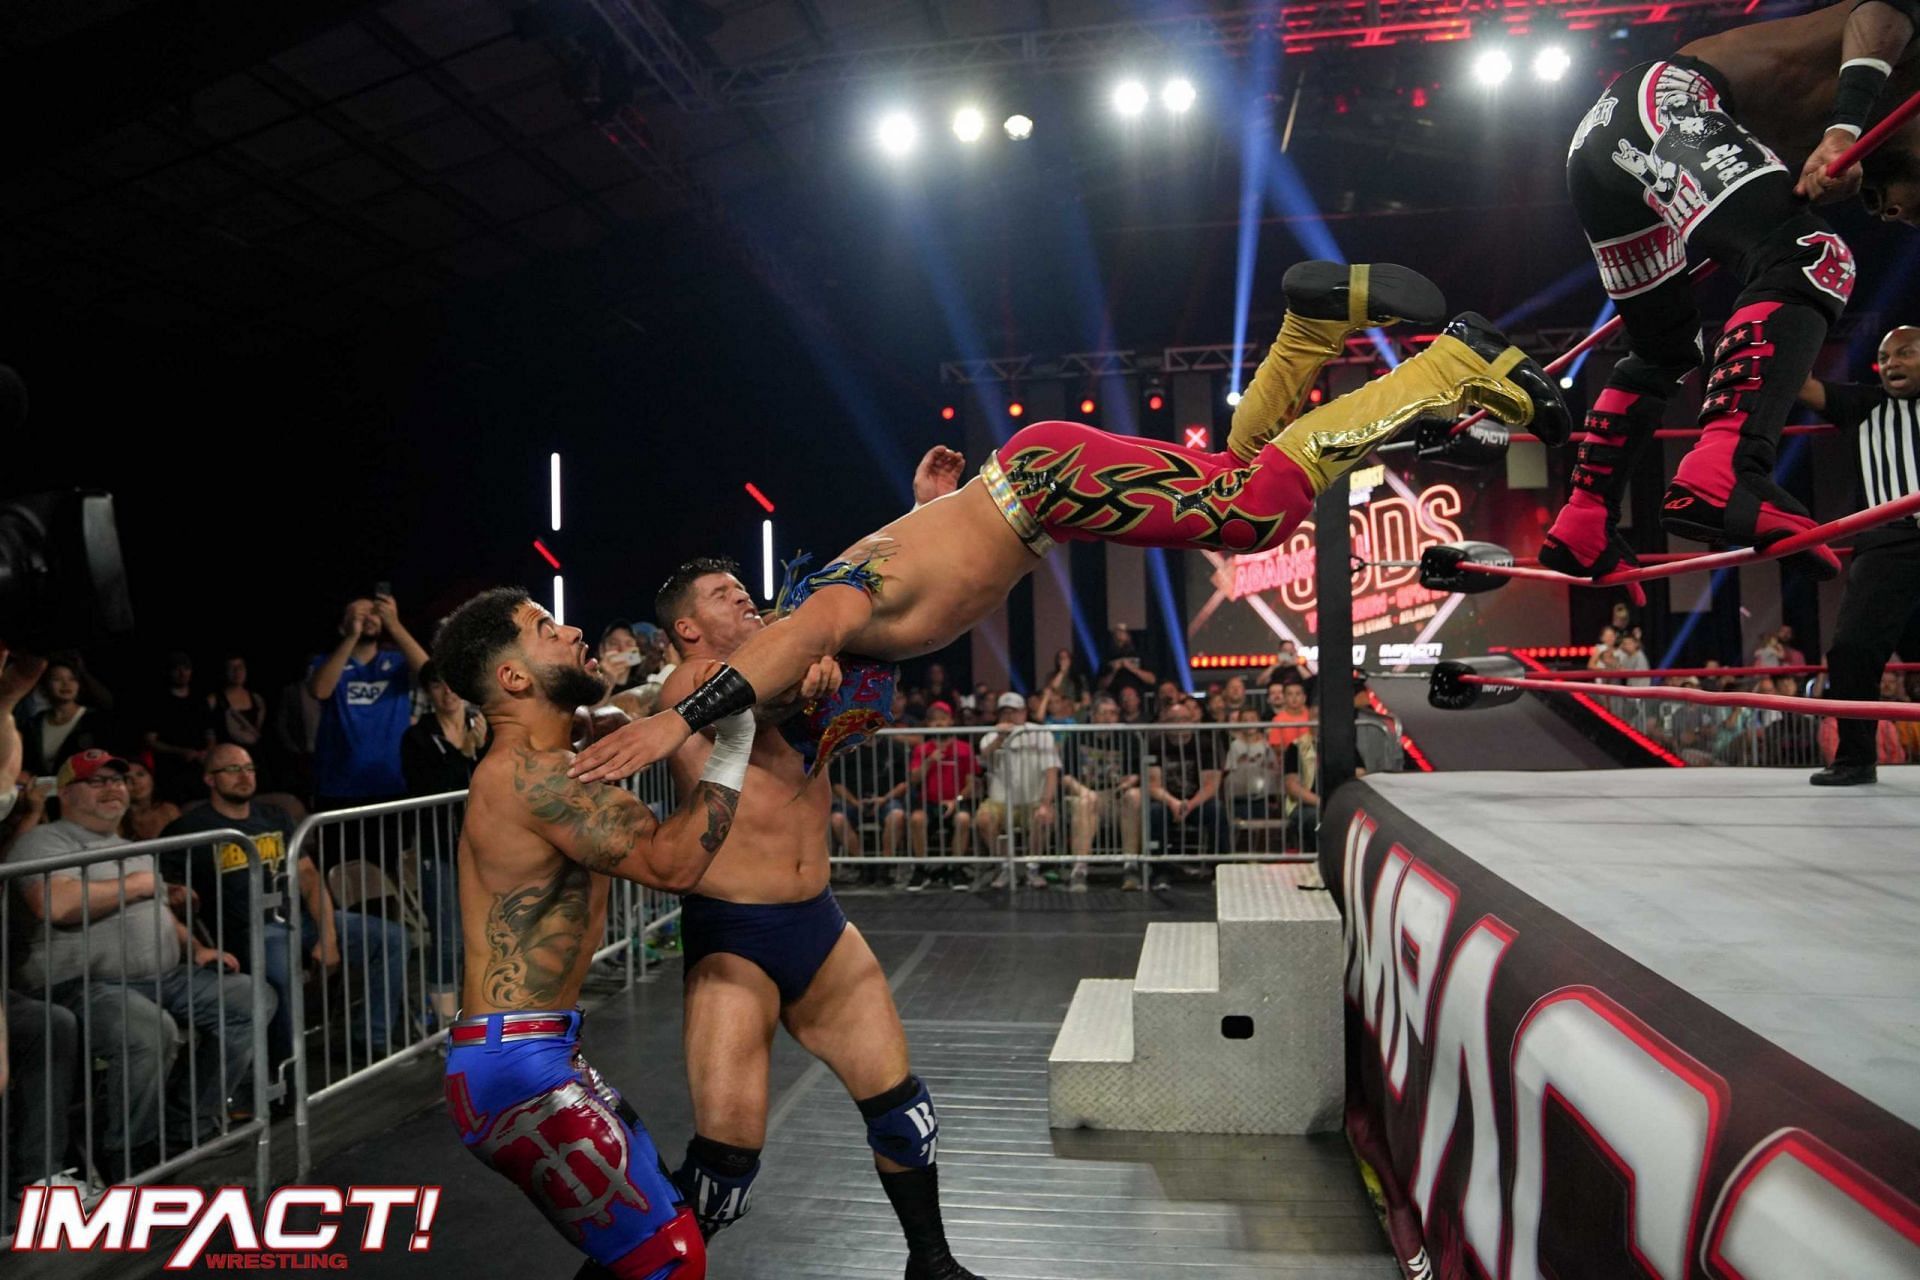 The show kicked off with a high-octane #1 Contender match for X-Division Championship